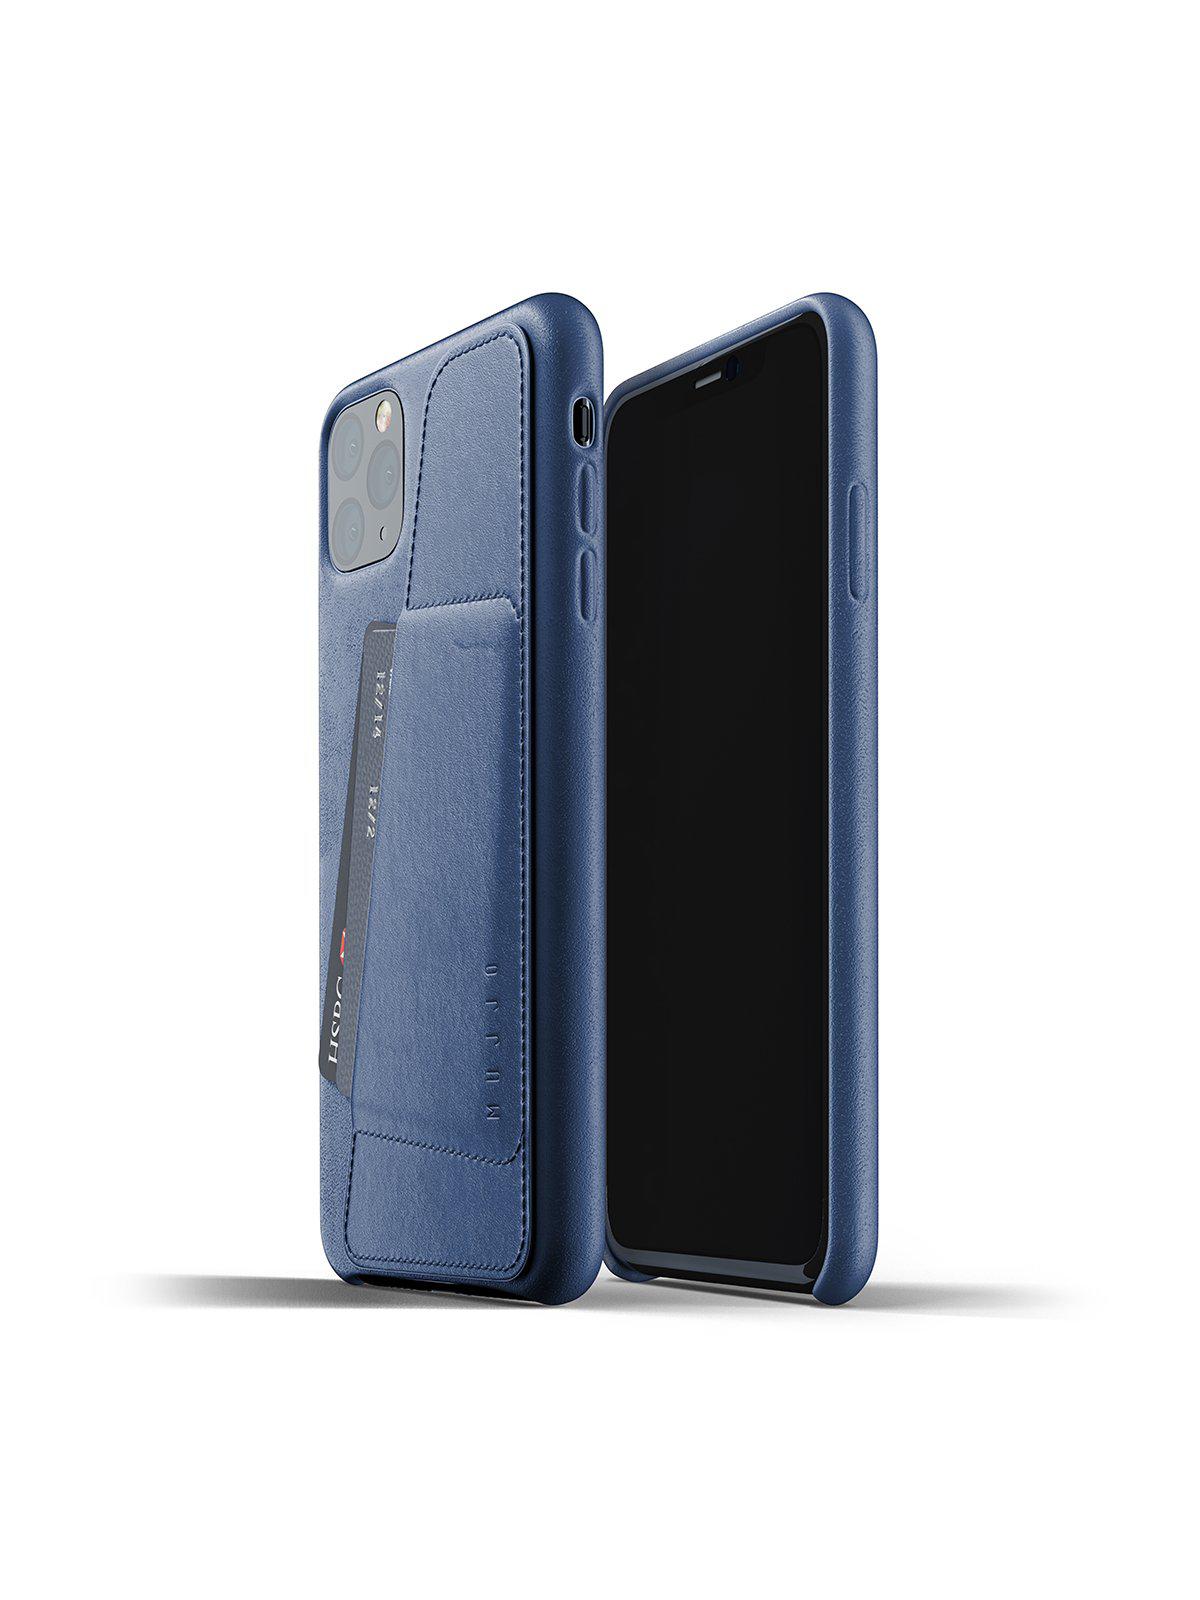 Mujjo Full Leather Wallet Case for iPhone 11 Pro Max Monaco Blue - MORE by Morello Indonesia